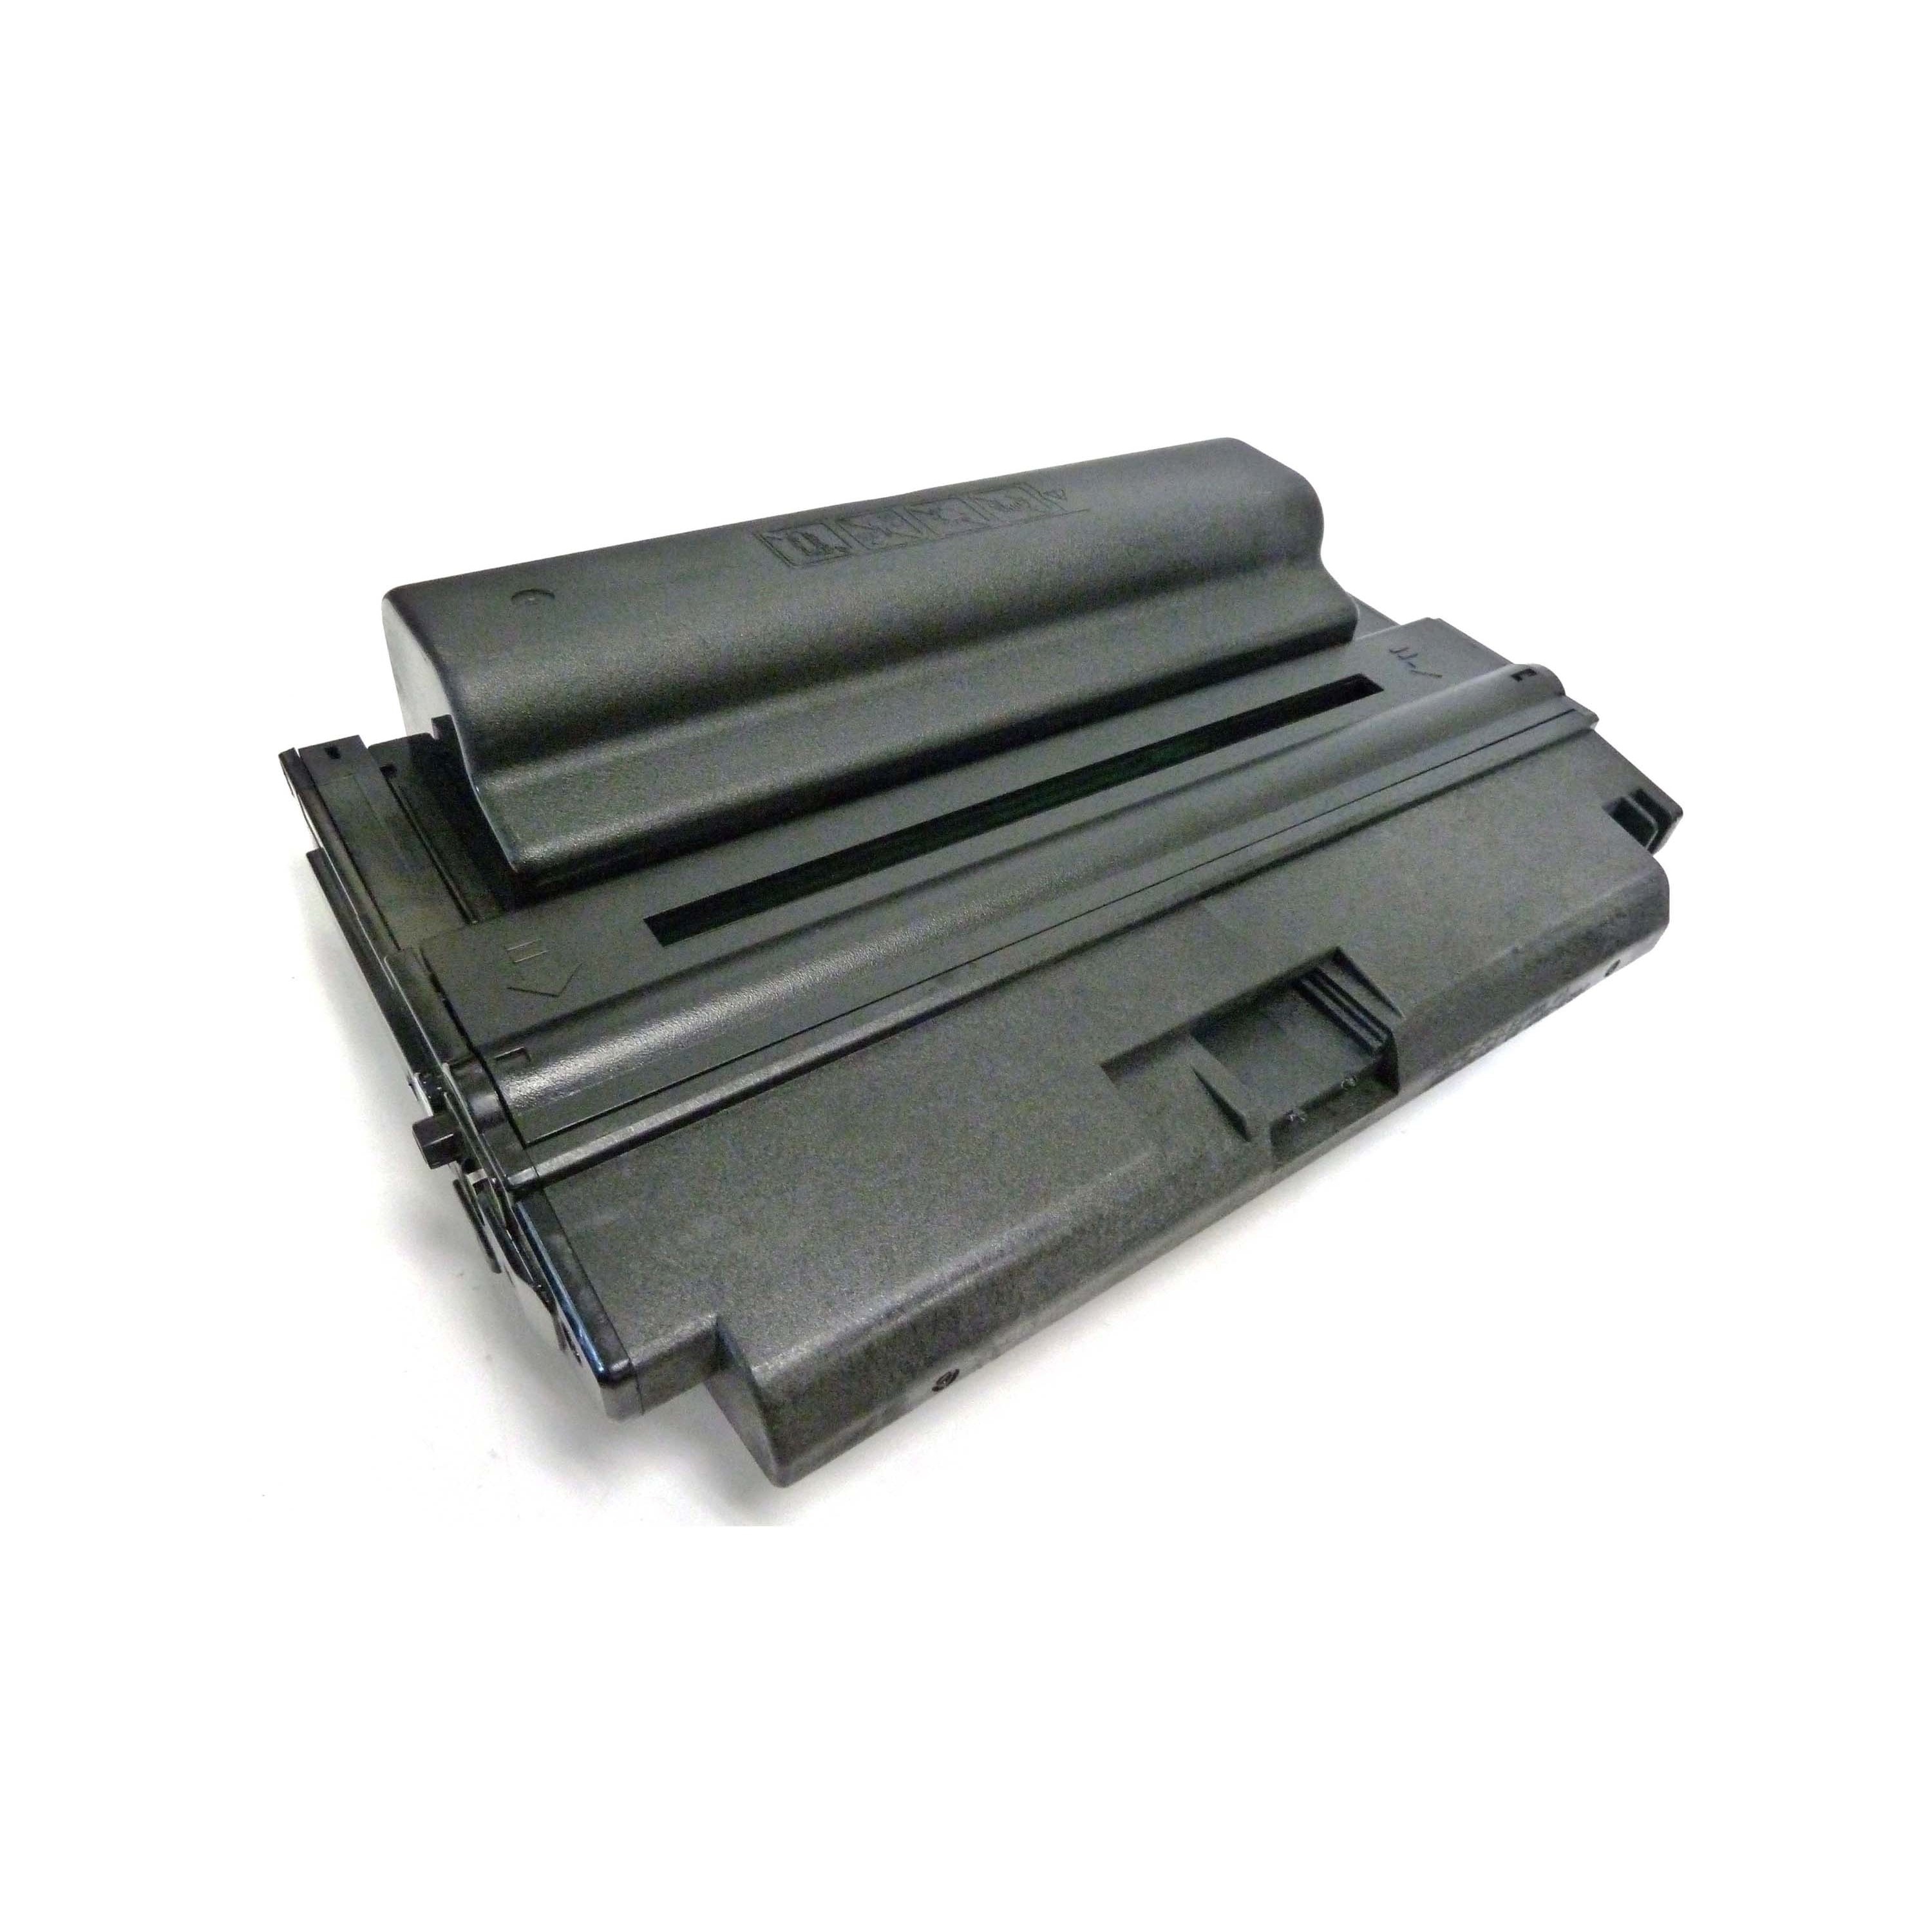 Compatible Xerox 106r01530 Toners For The Xerox Workcentre 3550 Printer